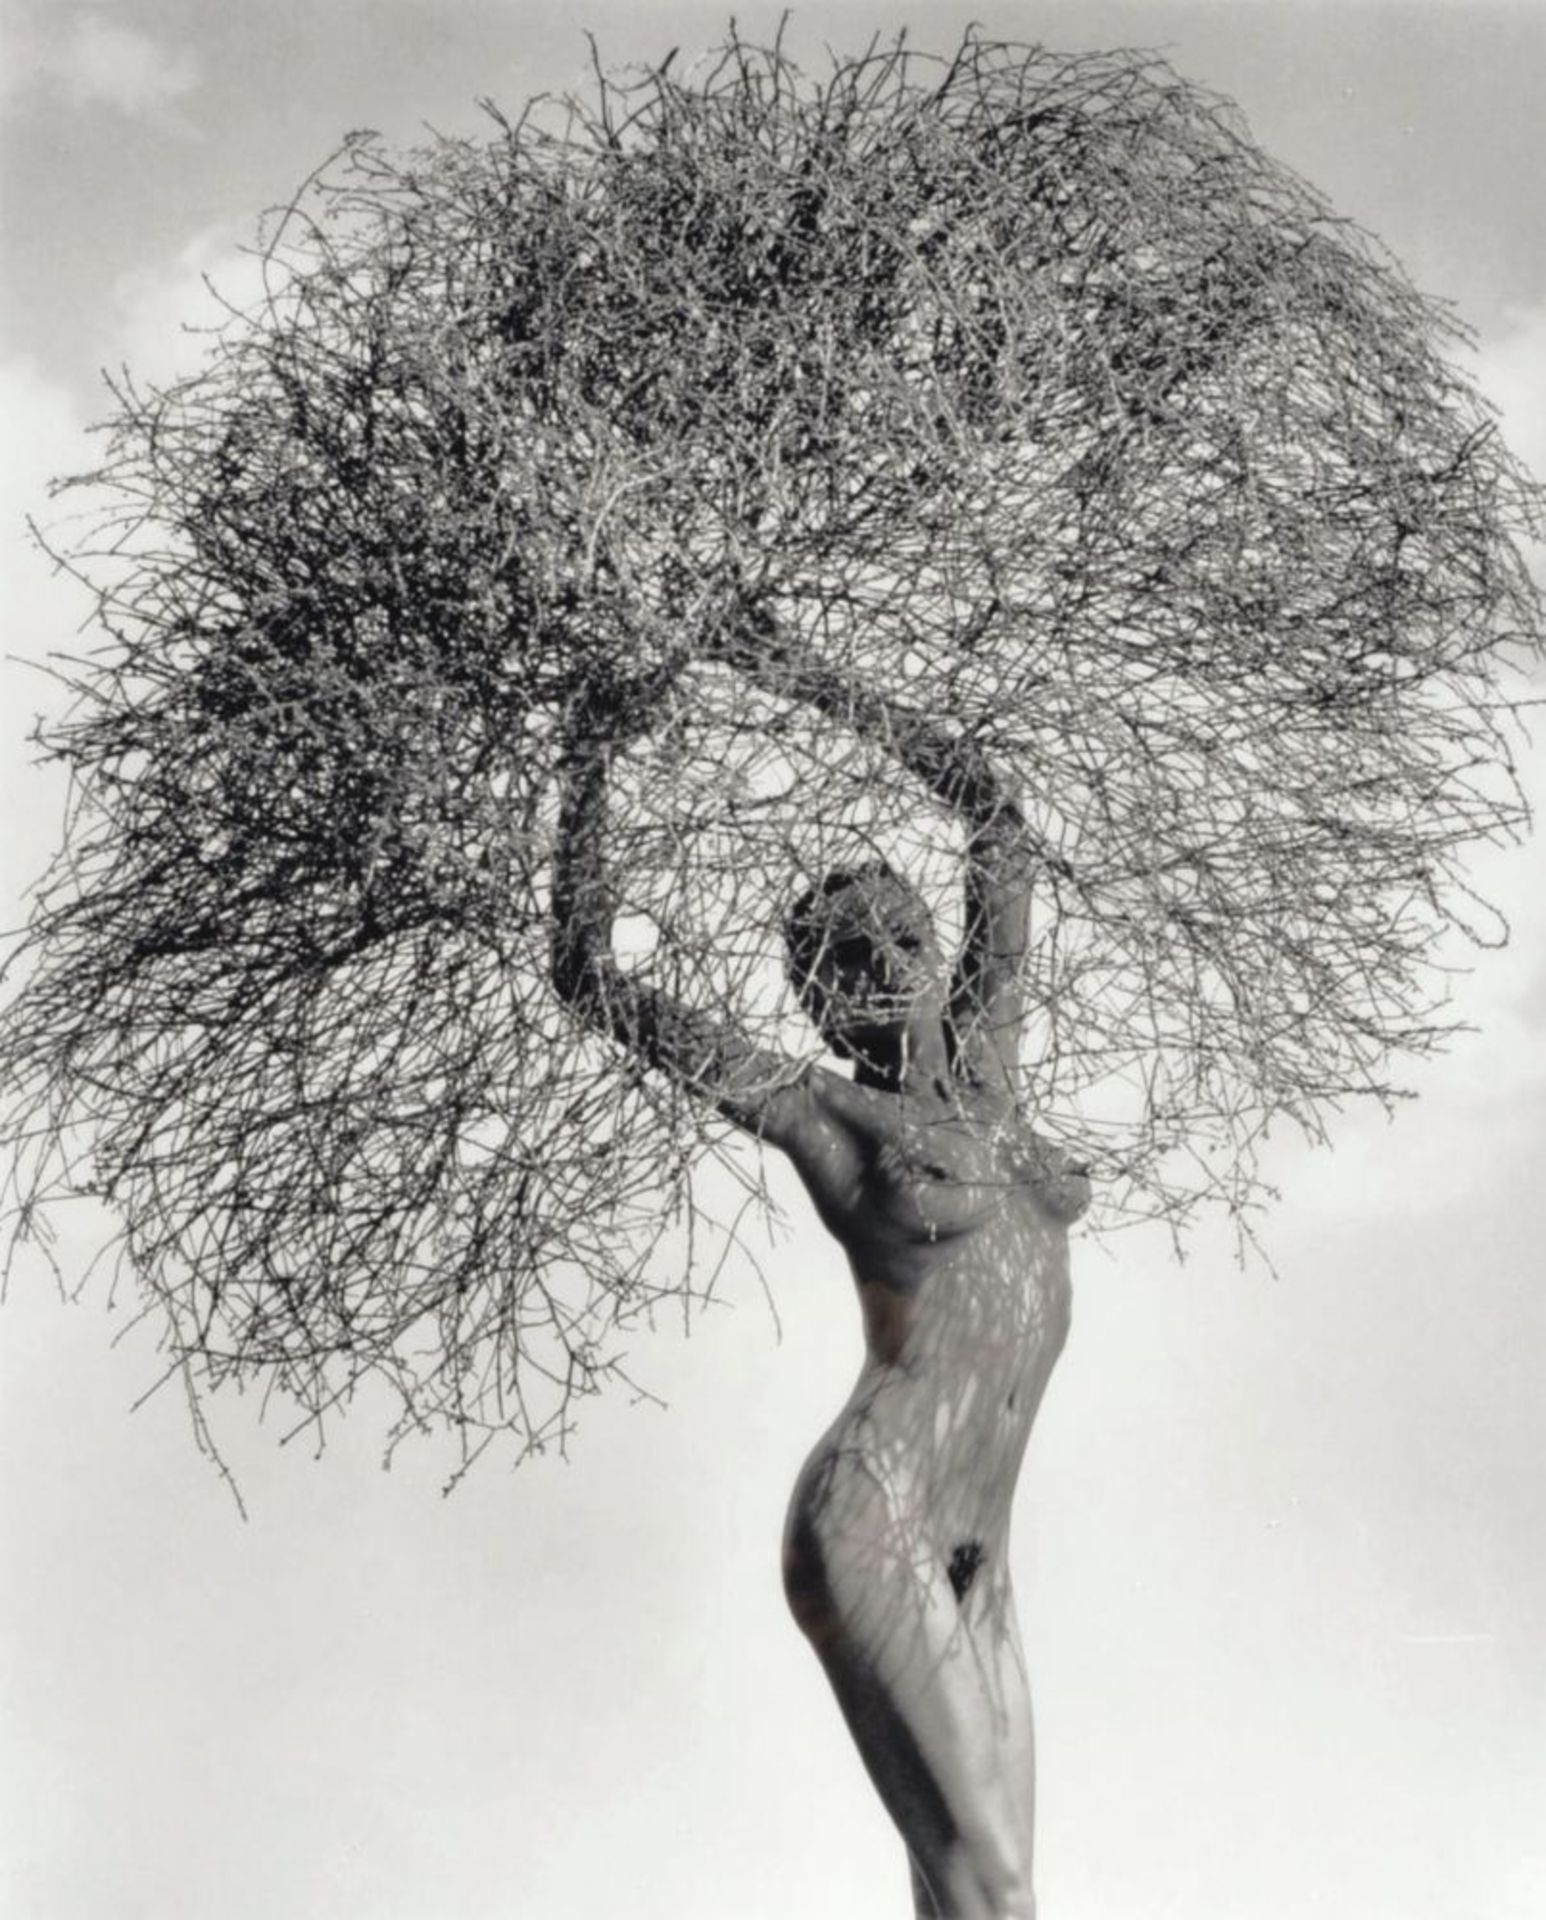 Ritts, Herb (Los Angeles 1952 - Los Angeles 2002). Neith with Tumbleweed Paradise Cove.